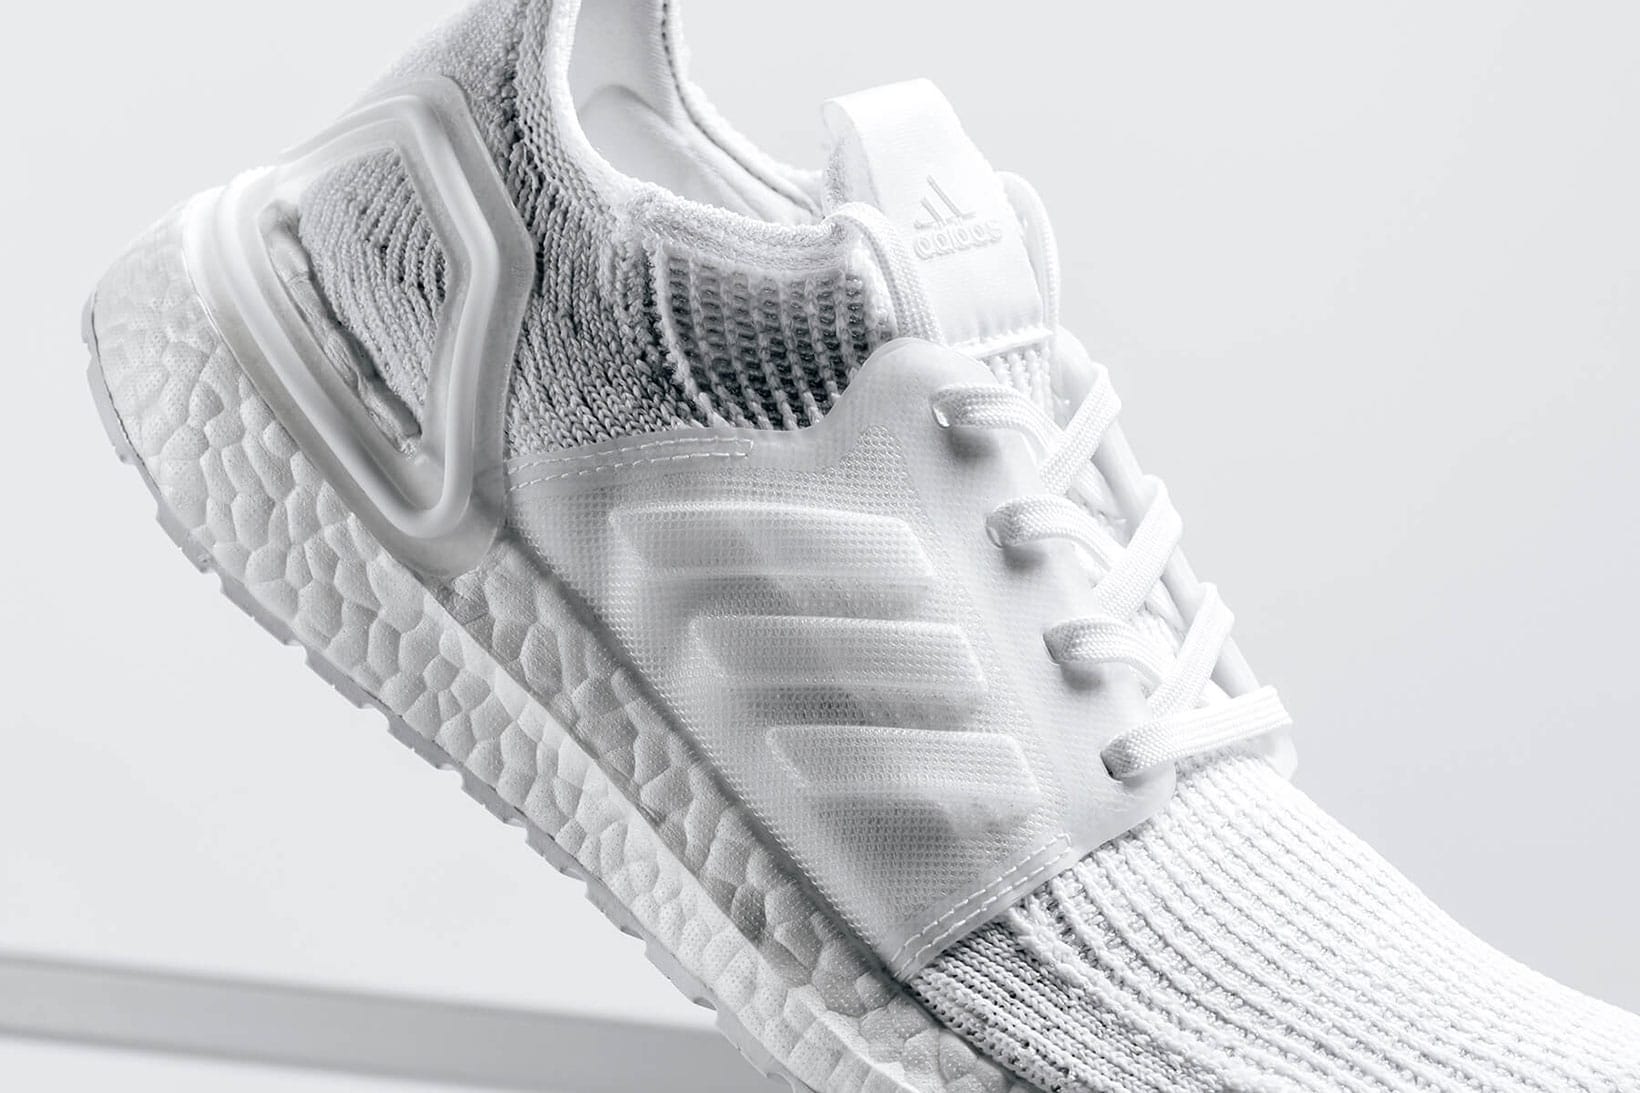 adidas' Latest UltraBOOST Arrives in 